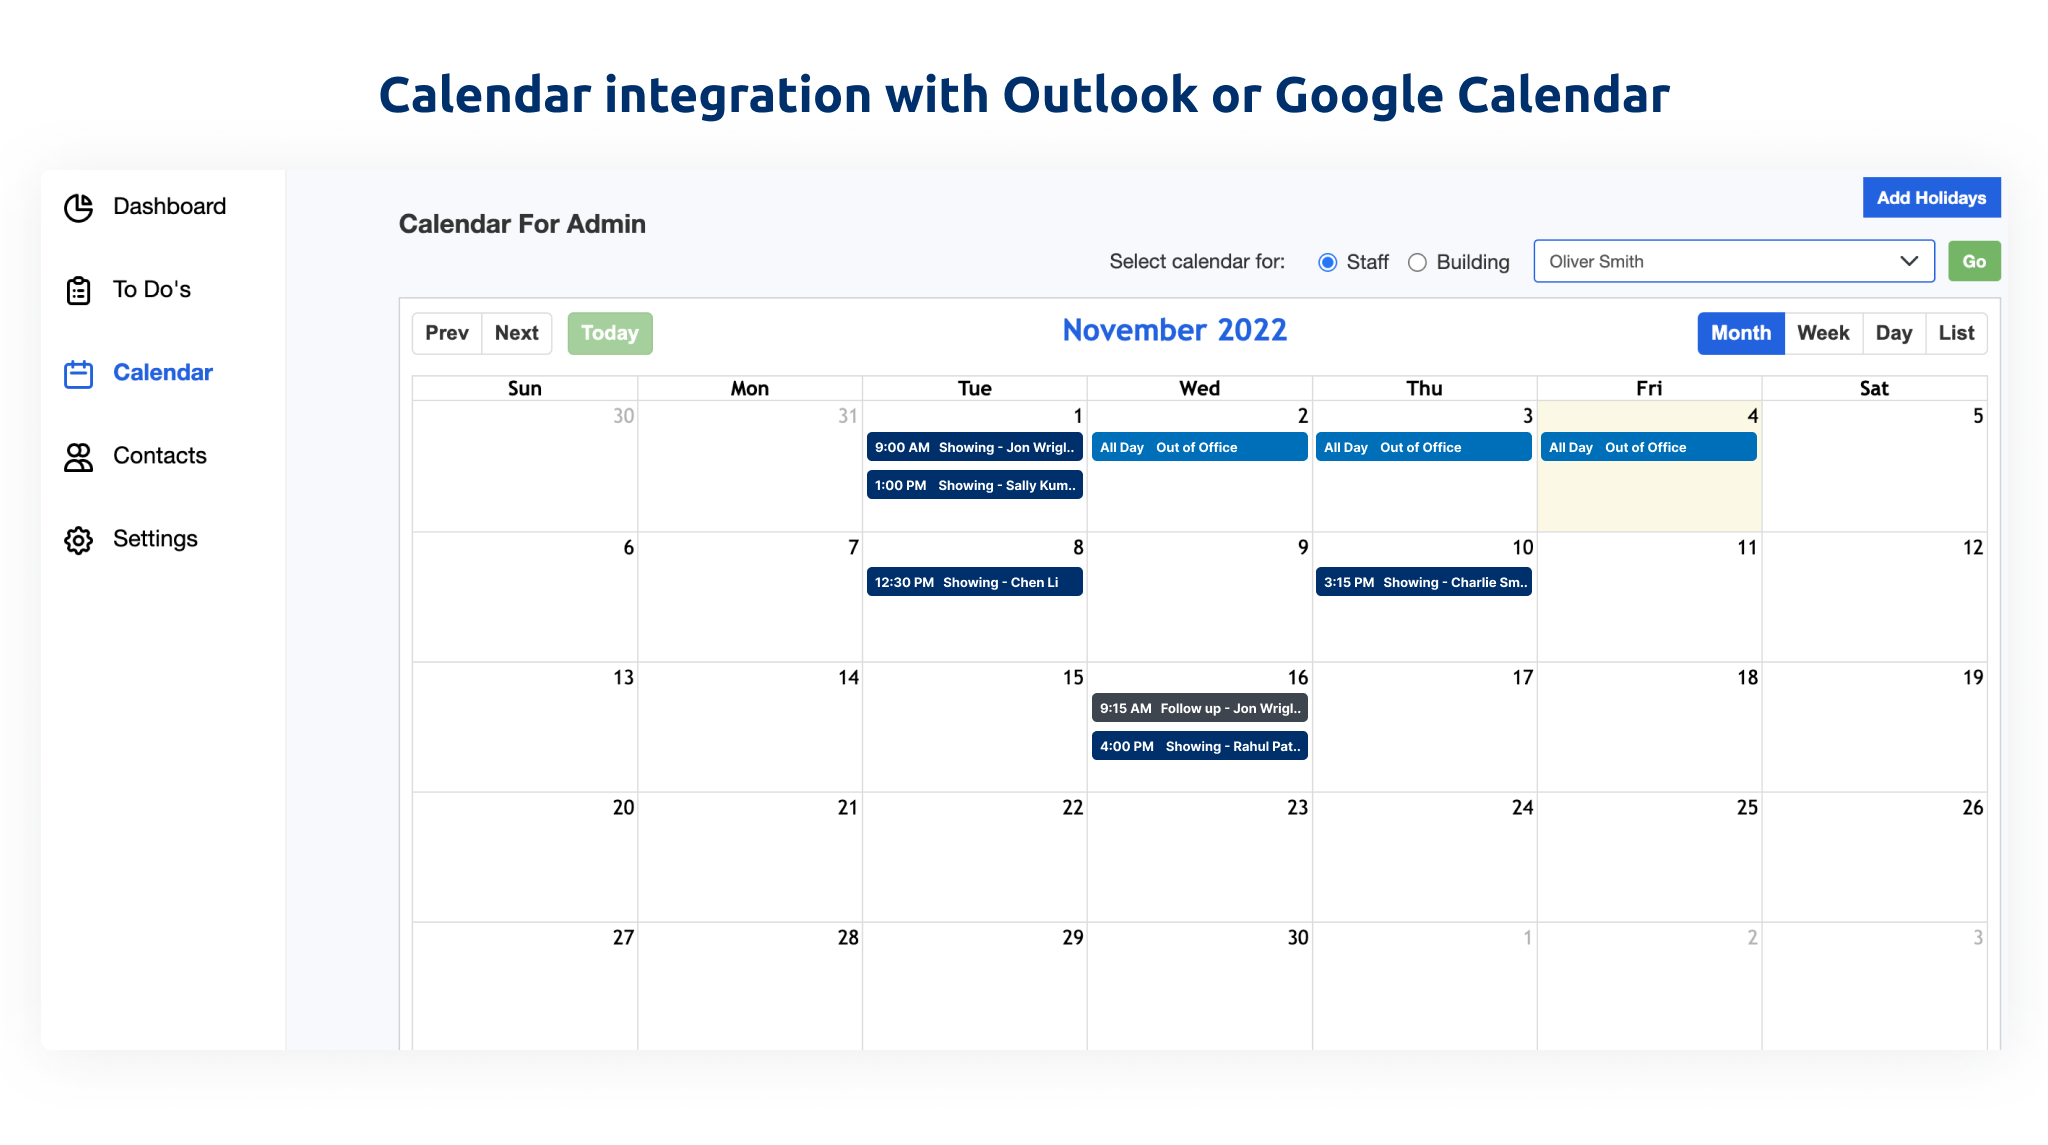 Integrate the Calendar with Outlook or GCal so you can block off time and view upcoming appointments.